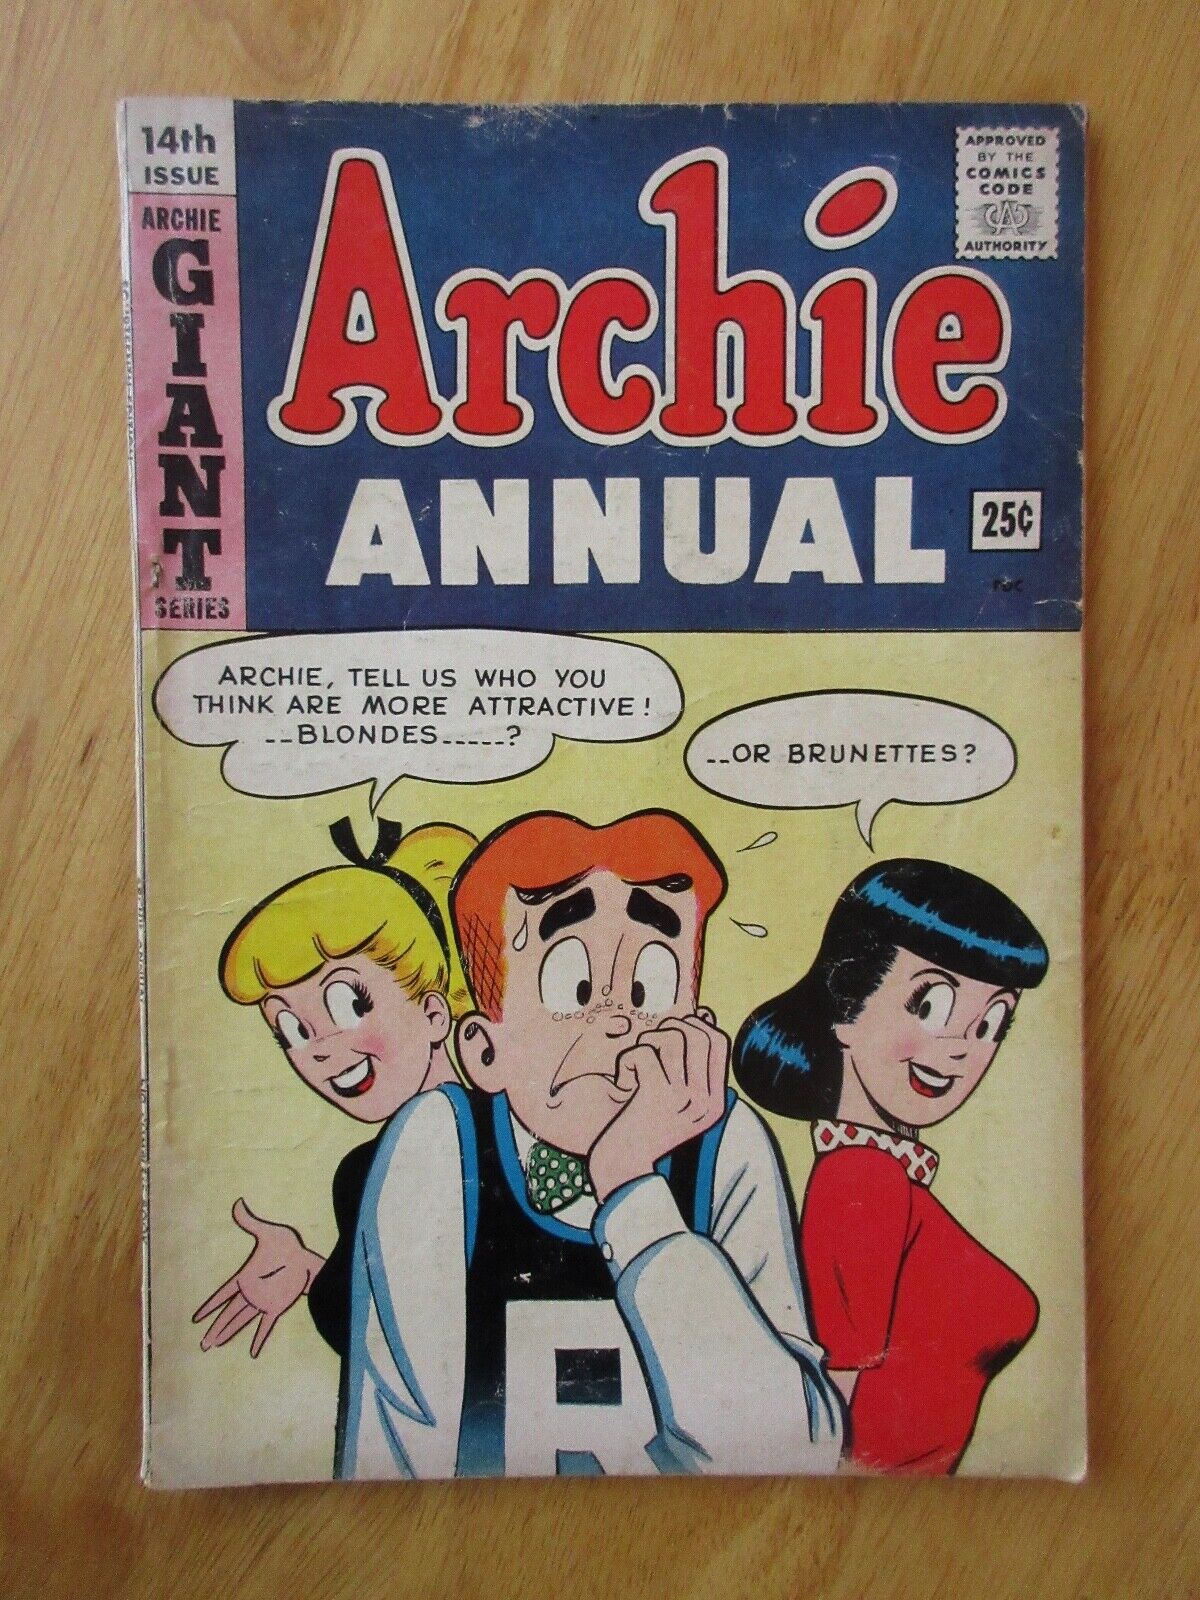 ARCHIE ANNUAL #14 (1962/25¢ Squarebound Giant) Great Cover Bright & Colorful